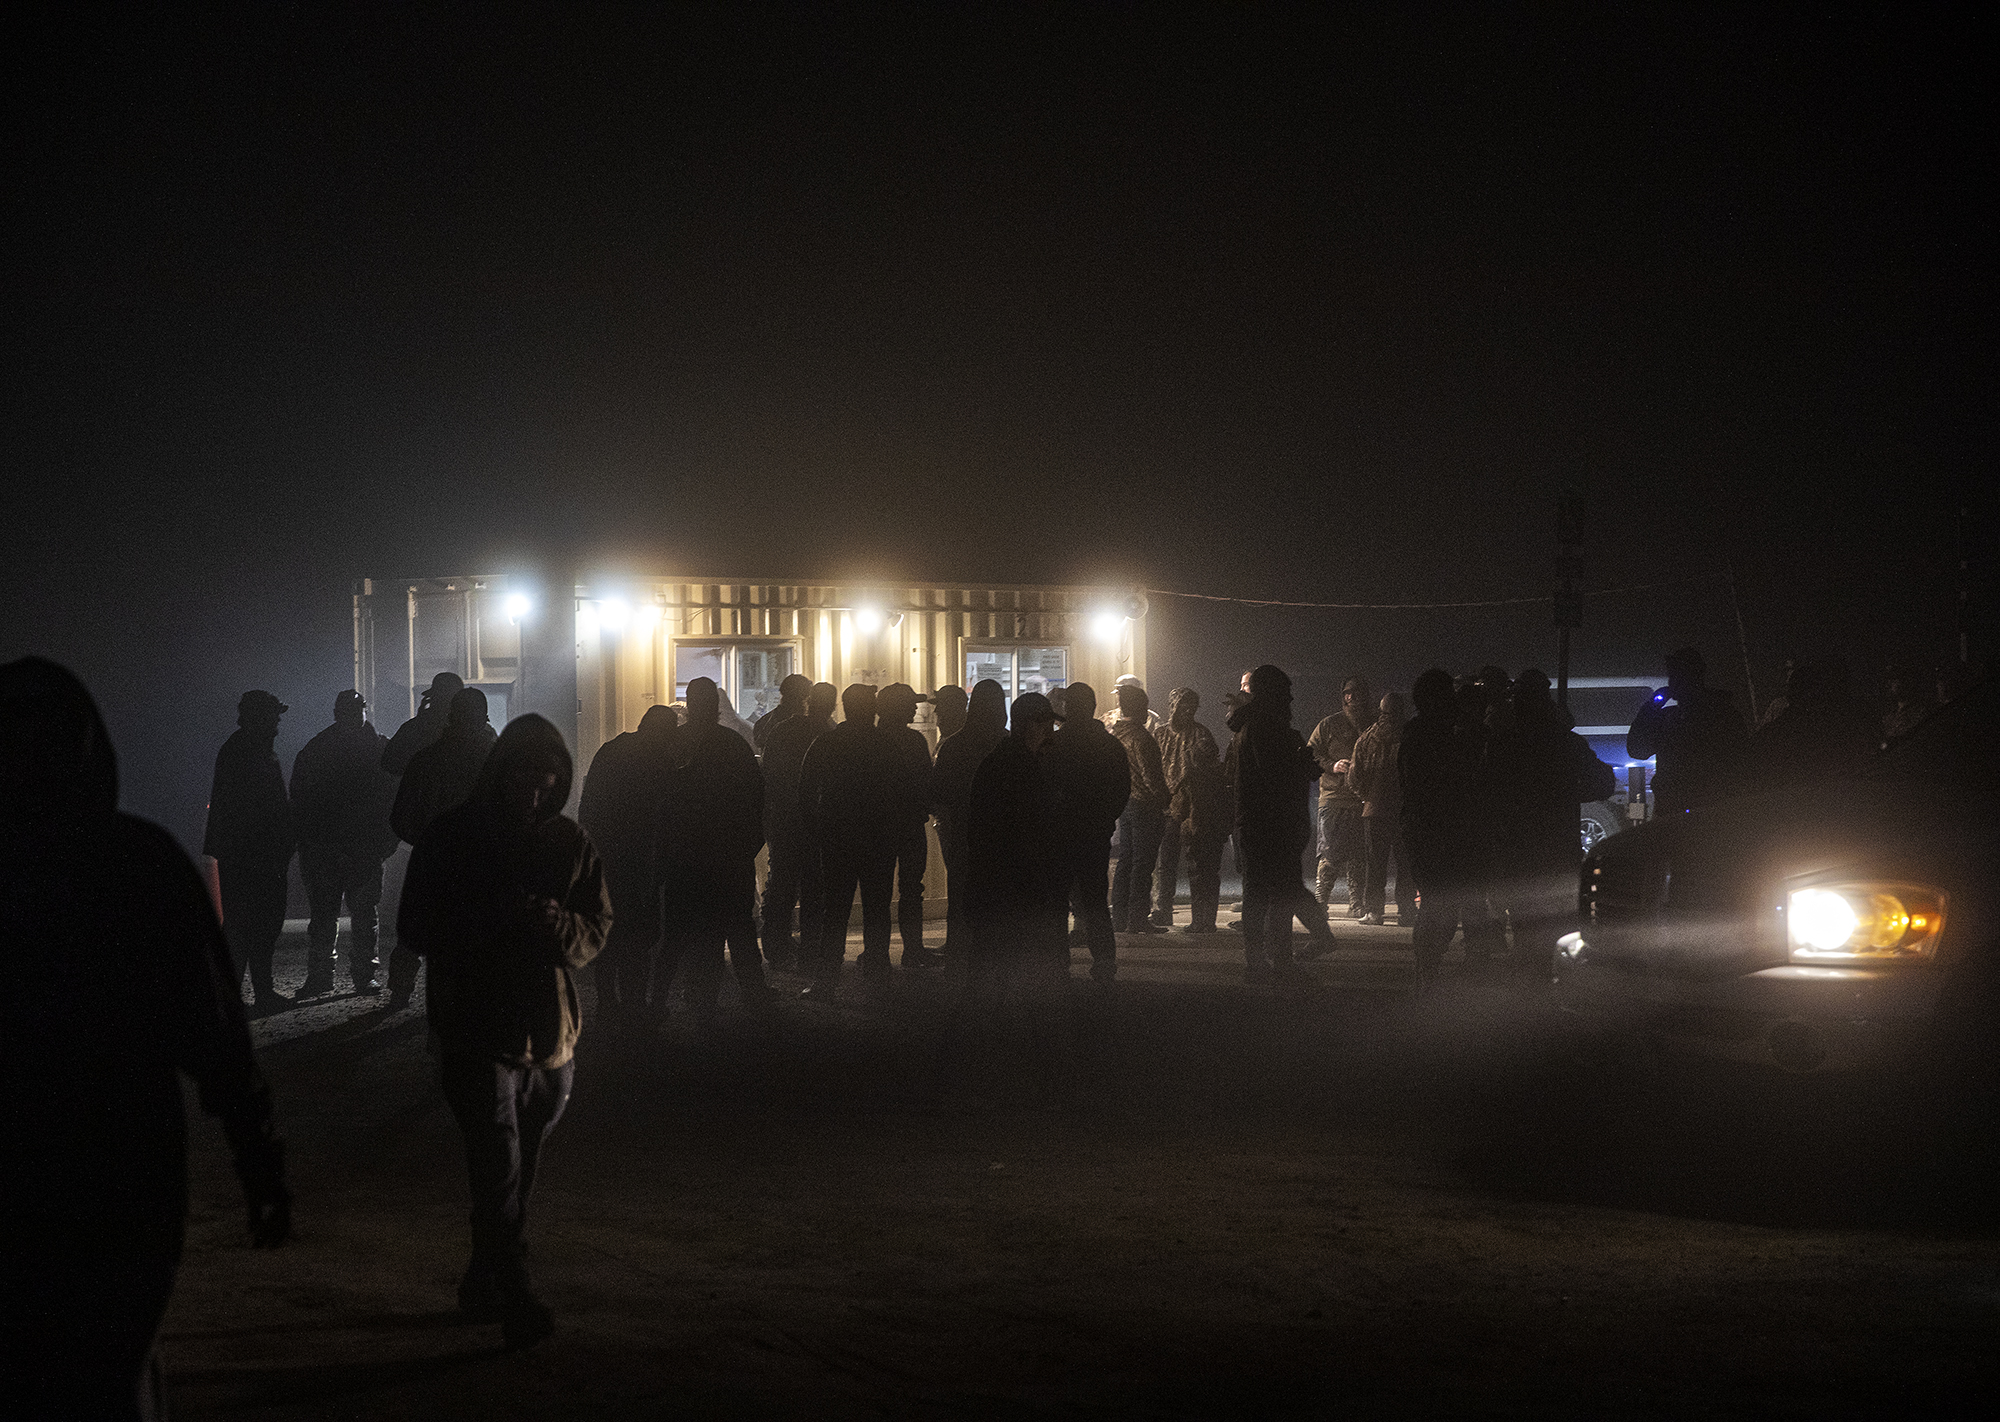 Hunters line up for a duck blind lottery in darkness. Photo by Tom Fowlks